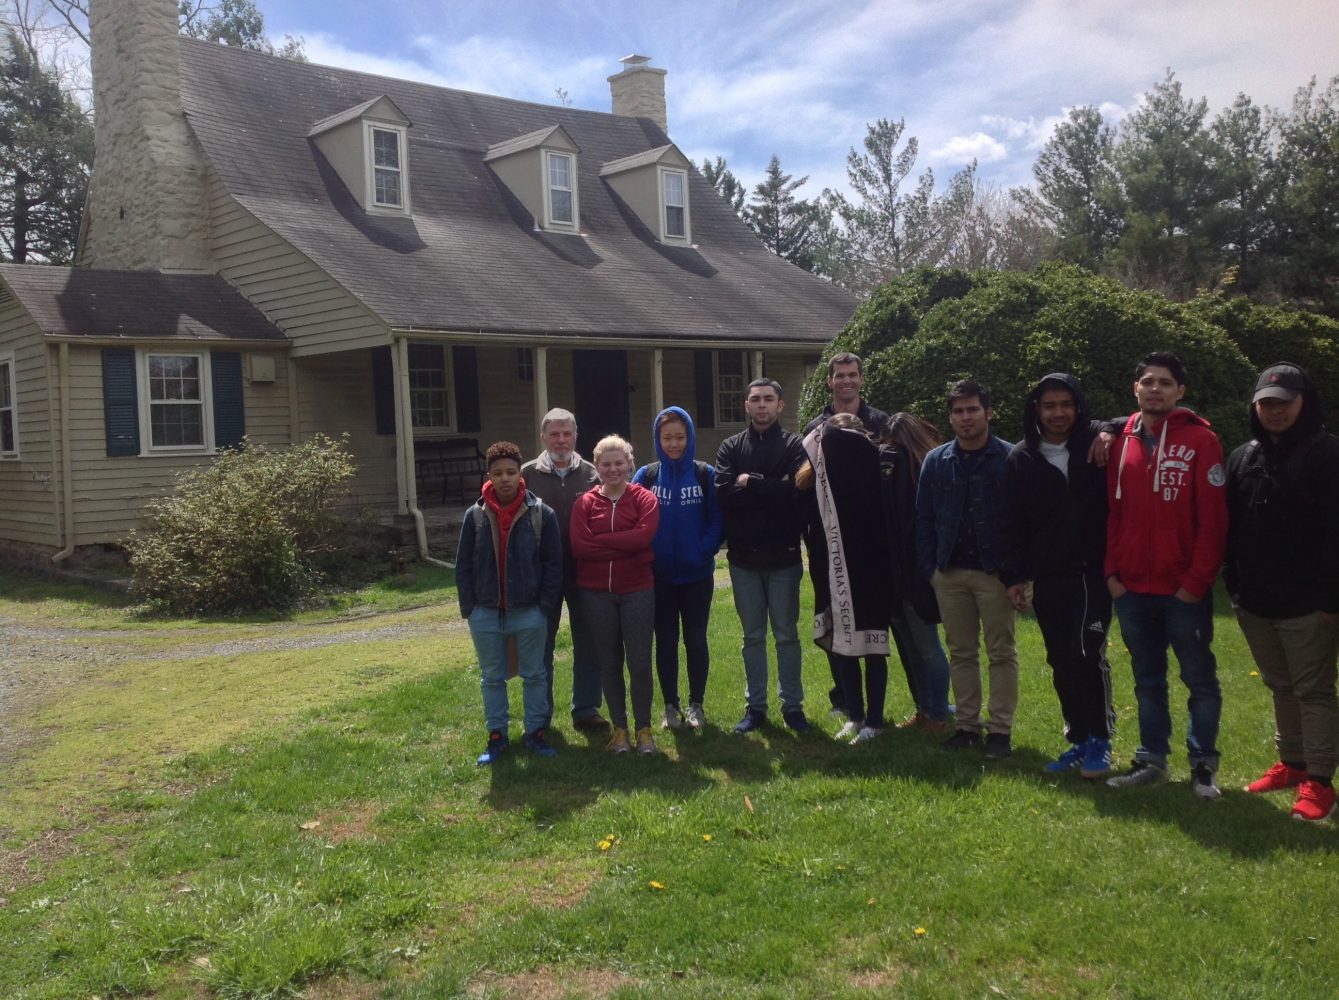 A group of students stands with the Professor in front of his historic home in the Mt. Gilead section of the historic district of Centreville, VA 